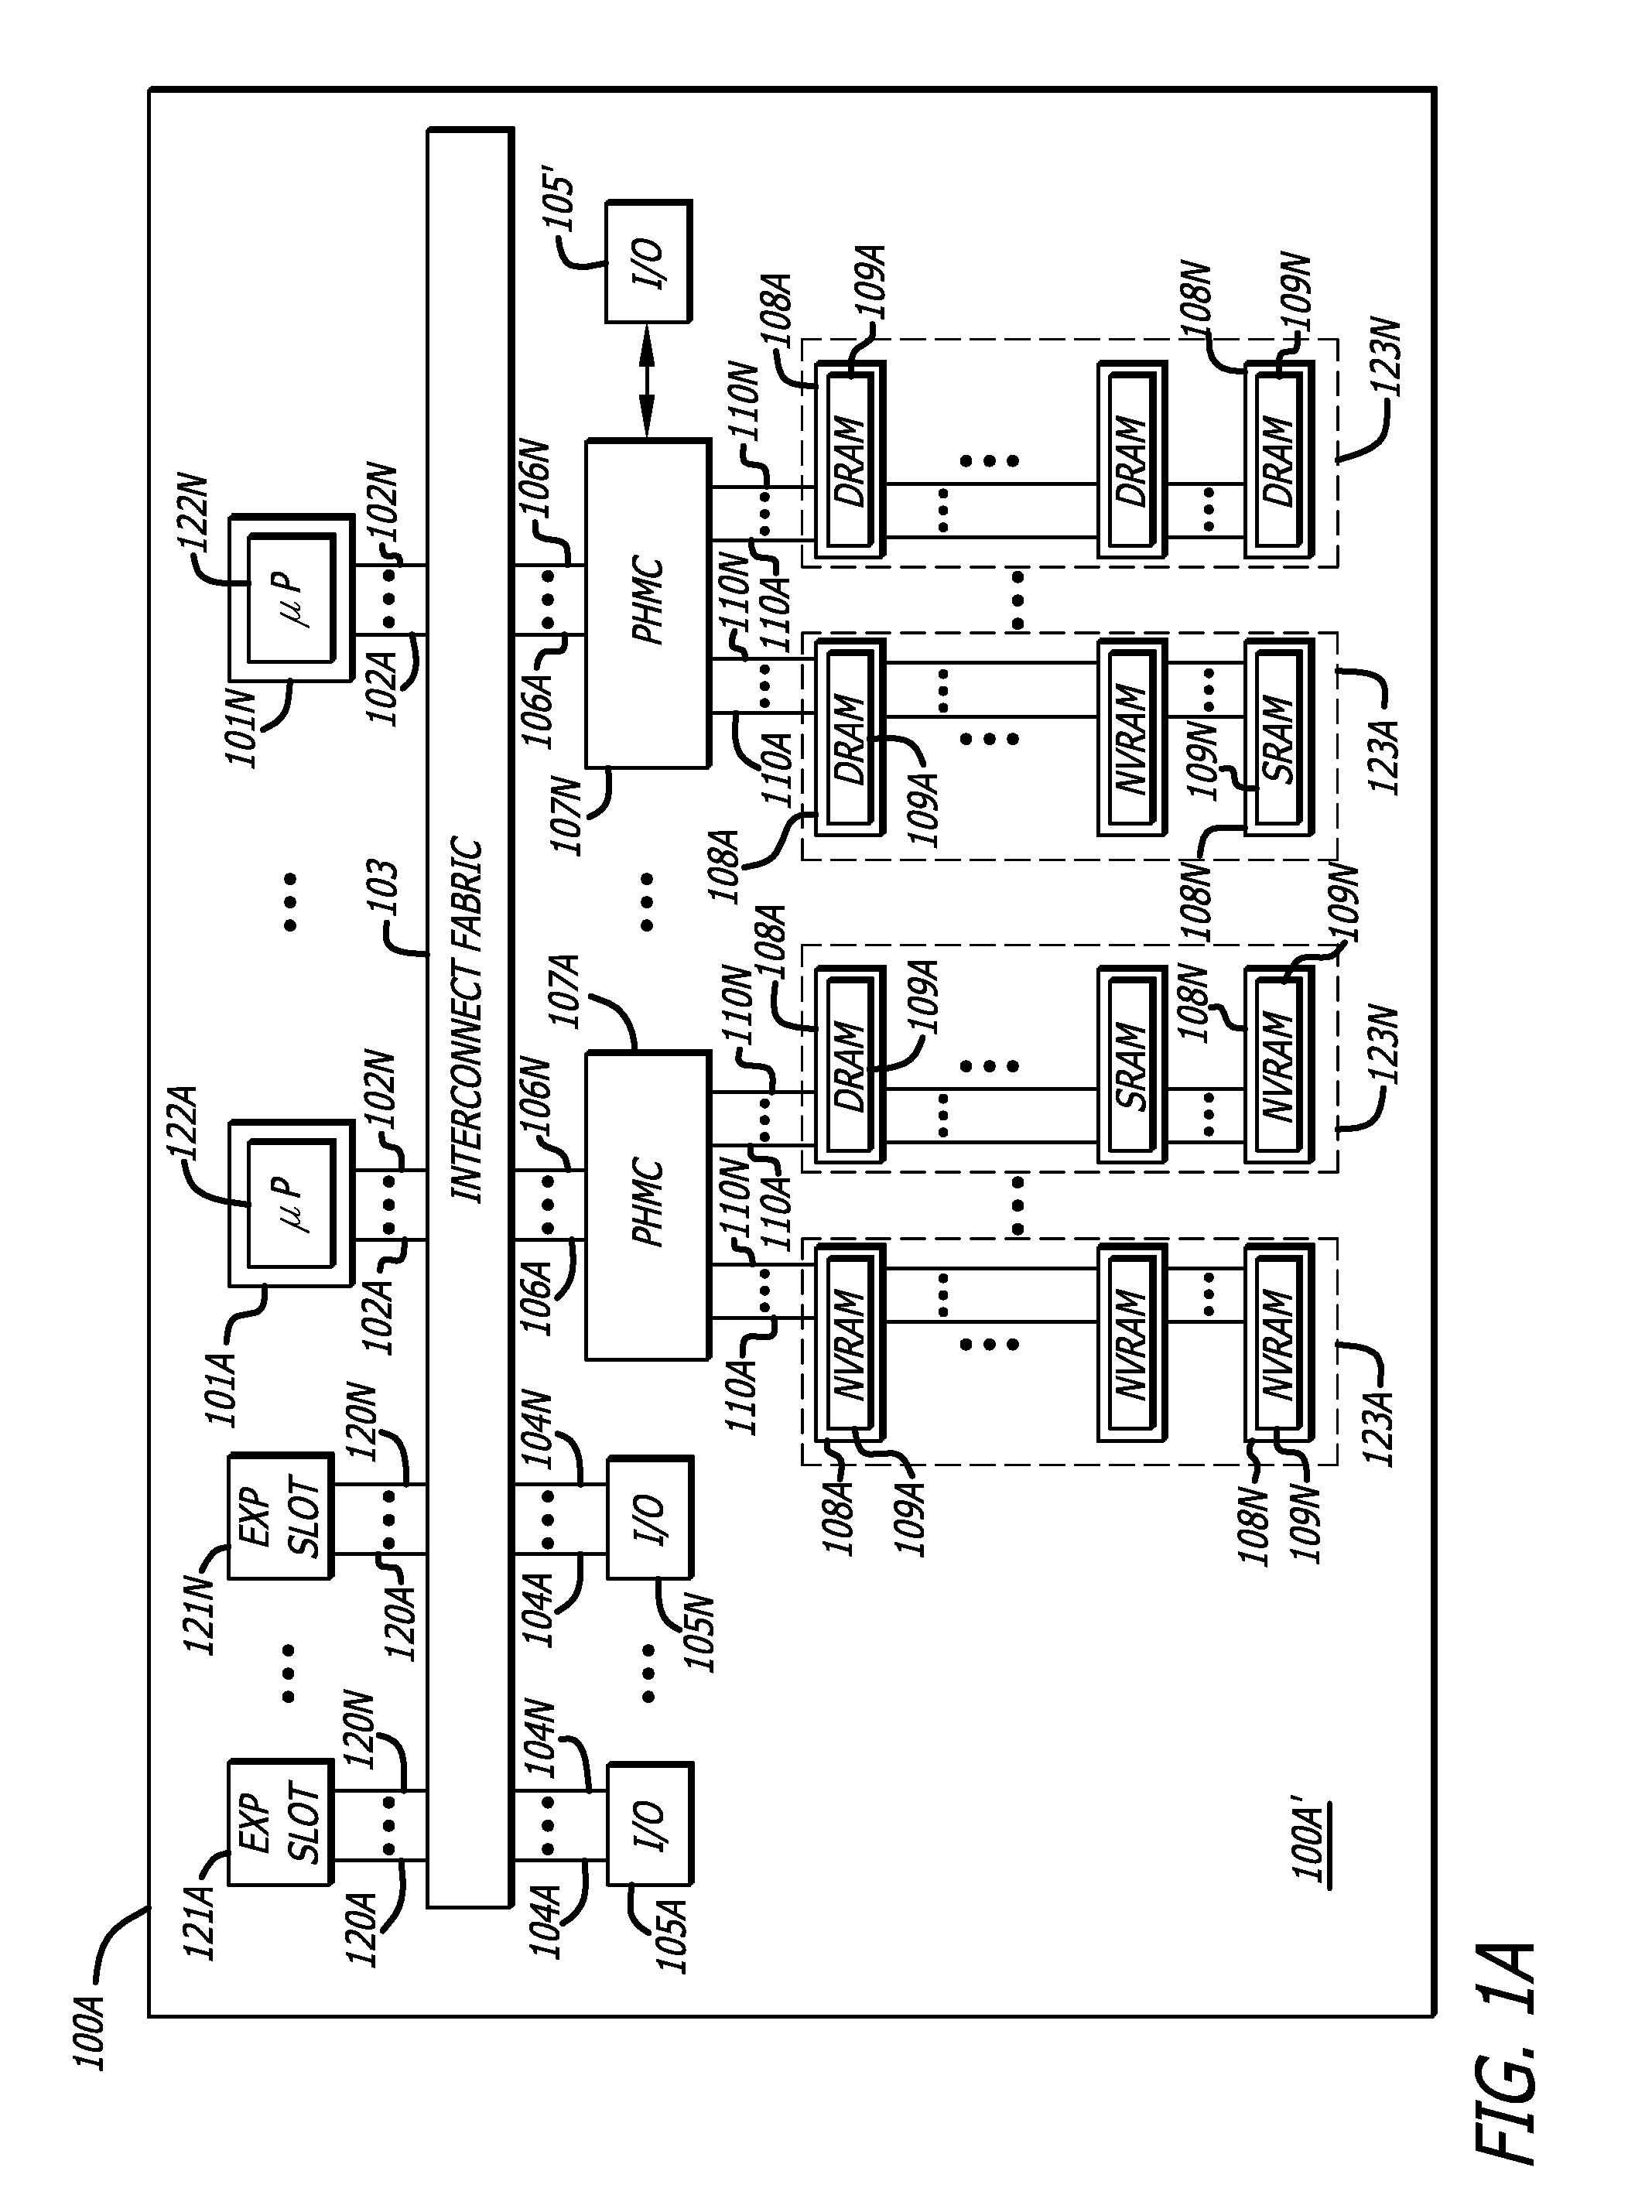 Systems and apparatus with programmable memory control for heterogeneous main memory